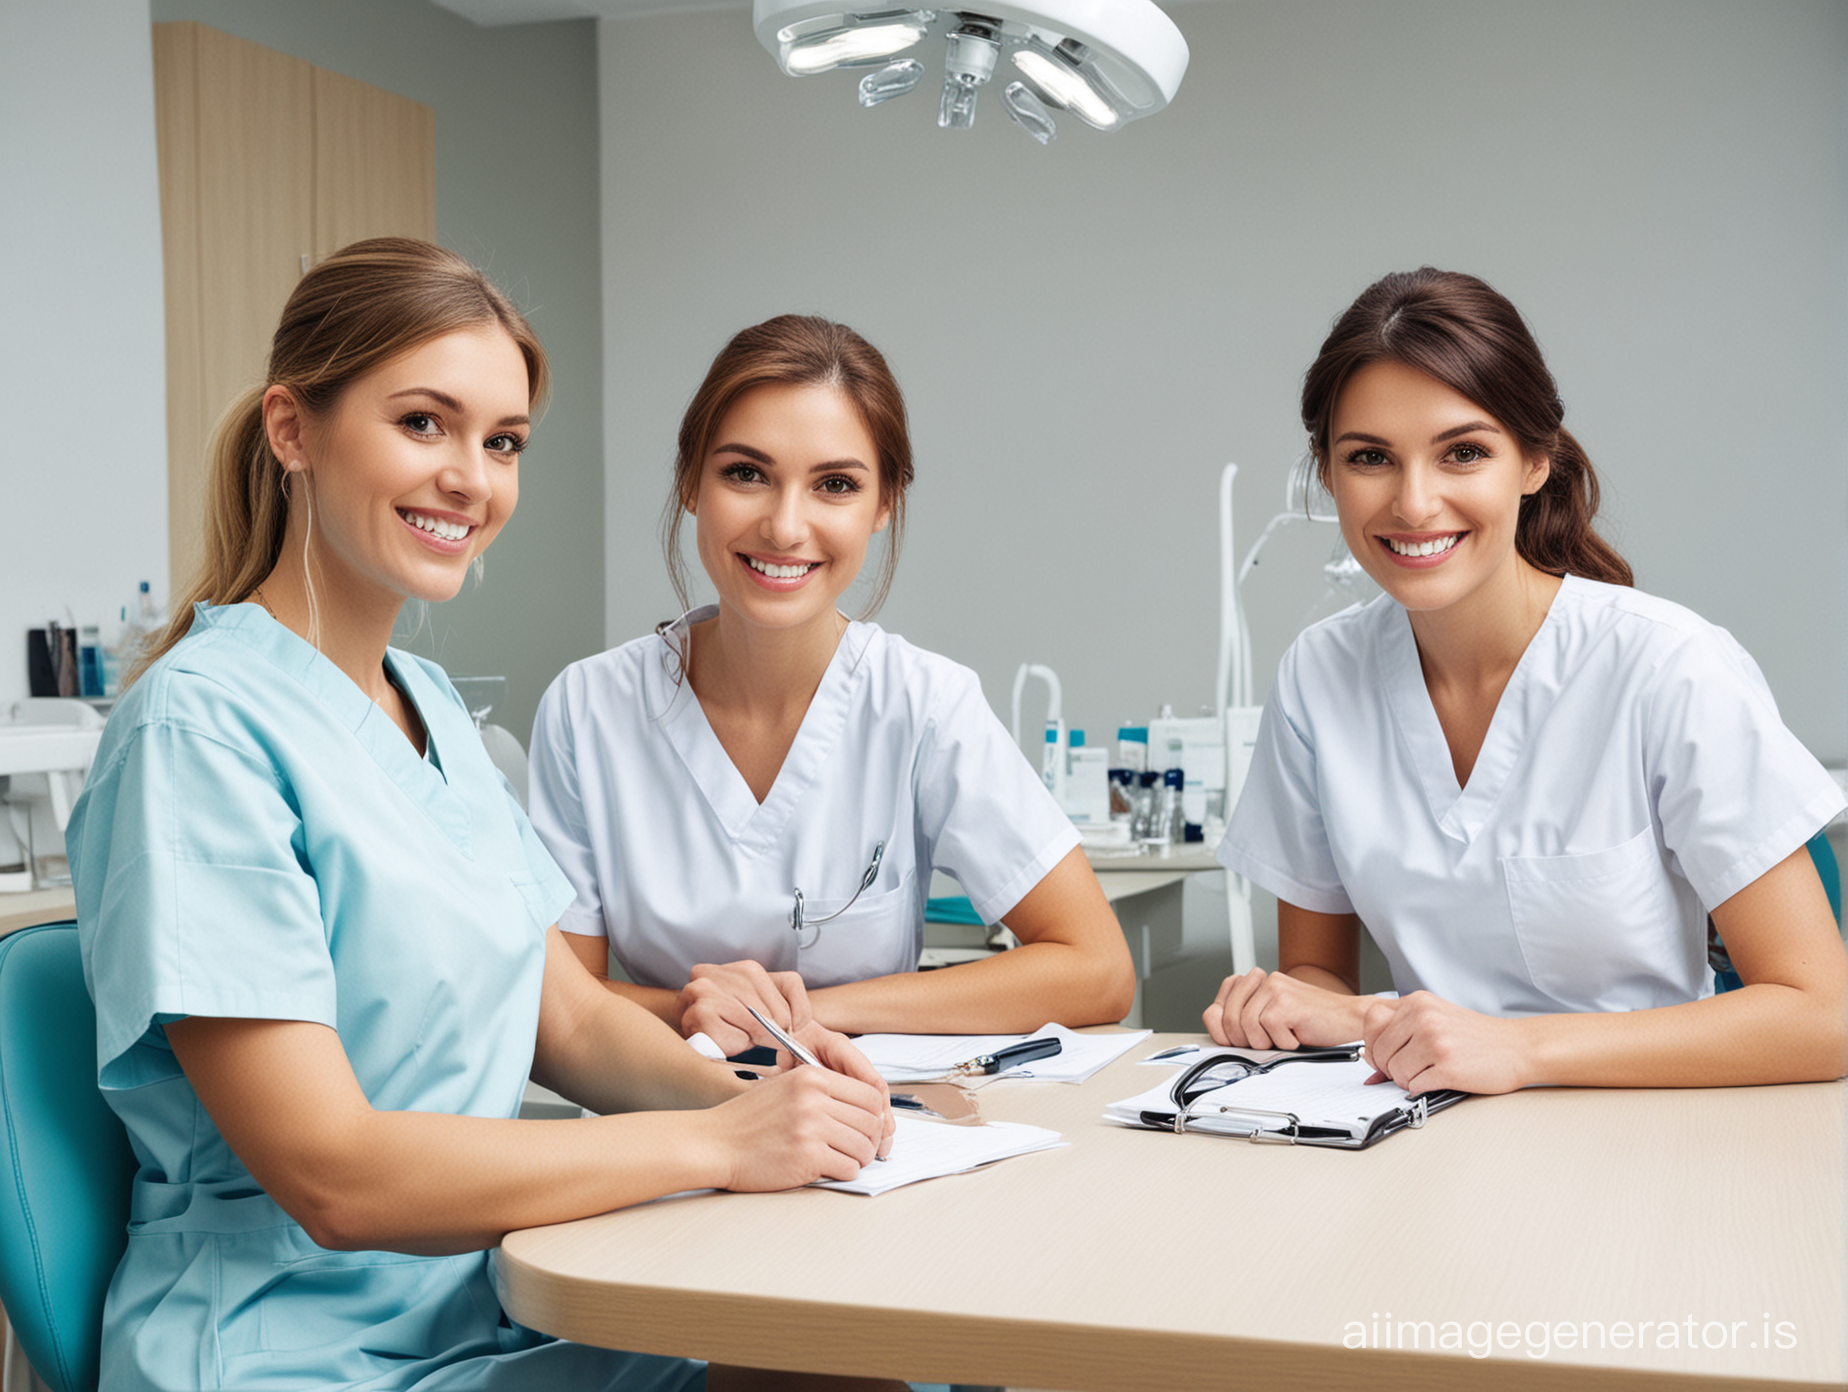 DENTISTRY TEAM DOCTORS AND NURSES. 4 PEOPLE AT A TABLE, IN AN OFFICE